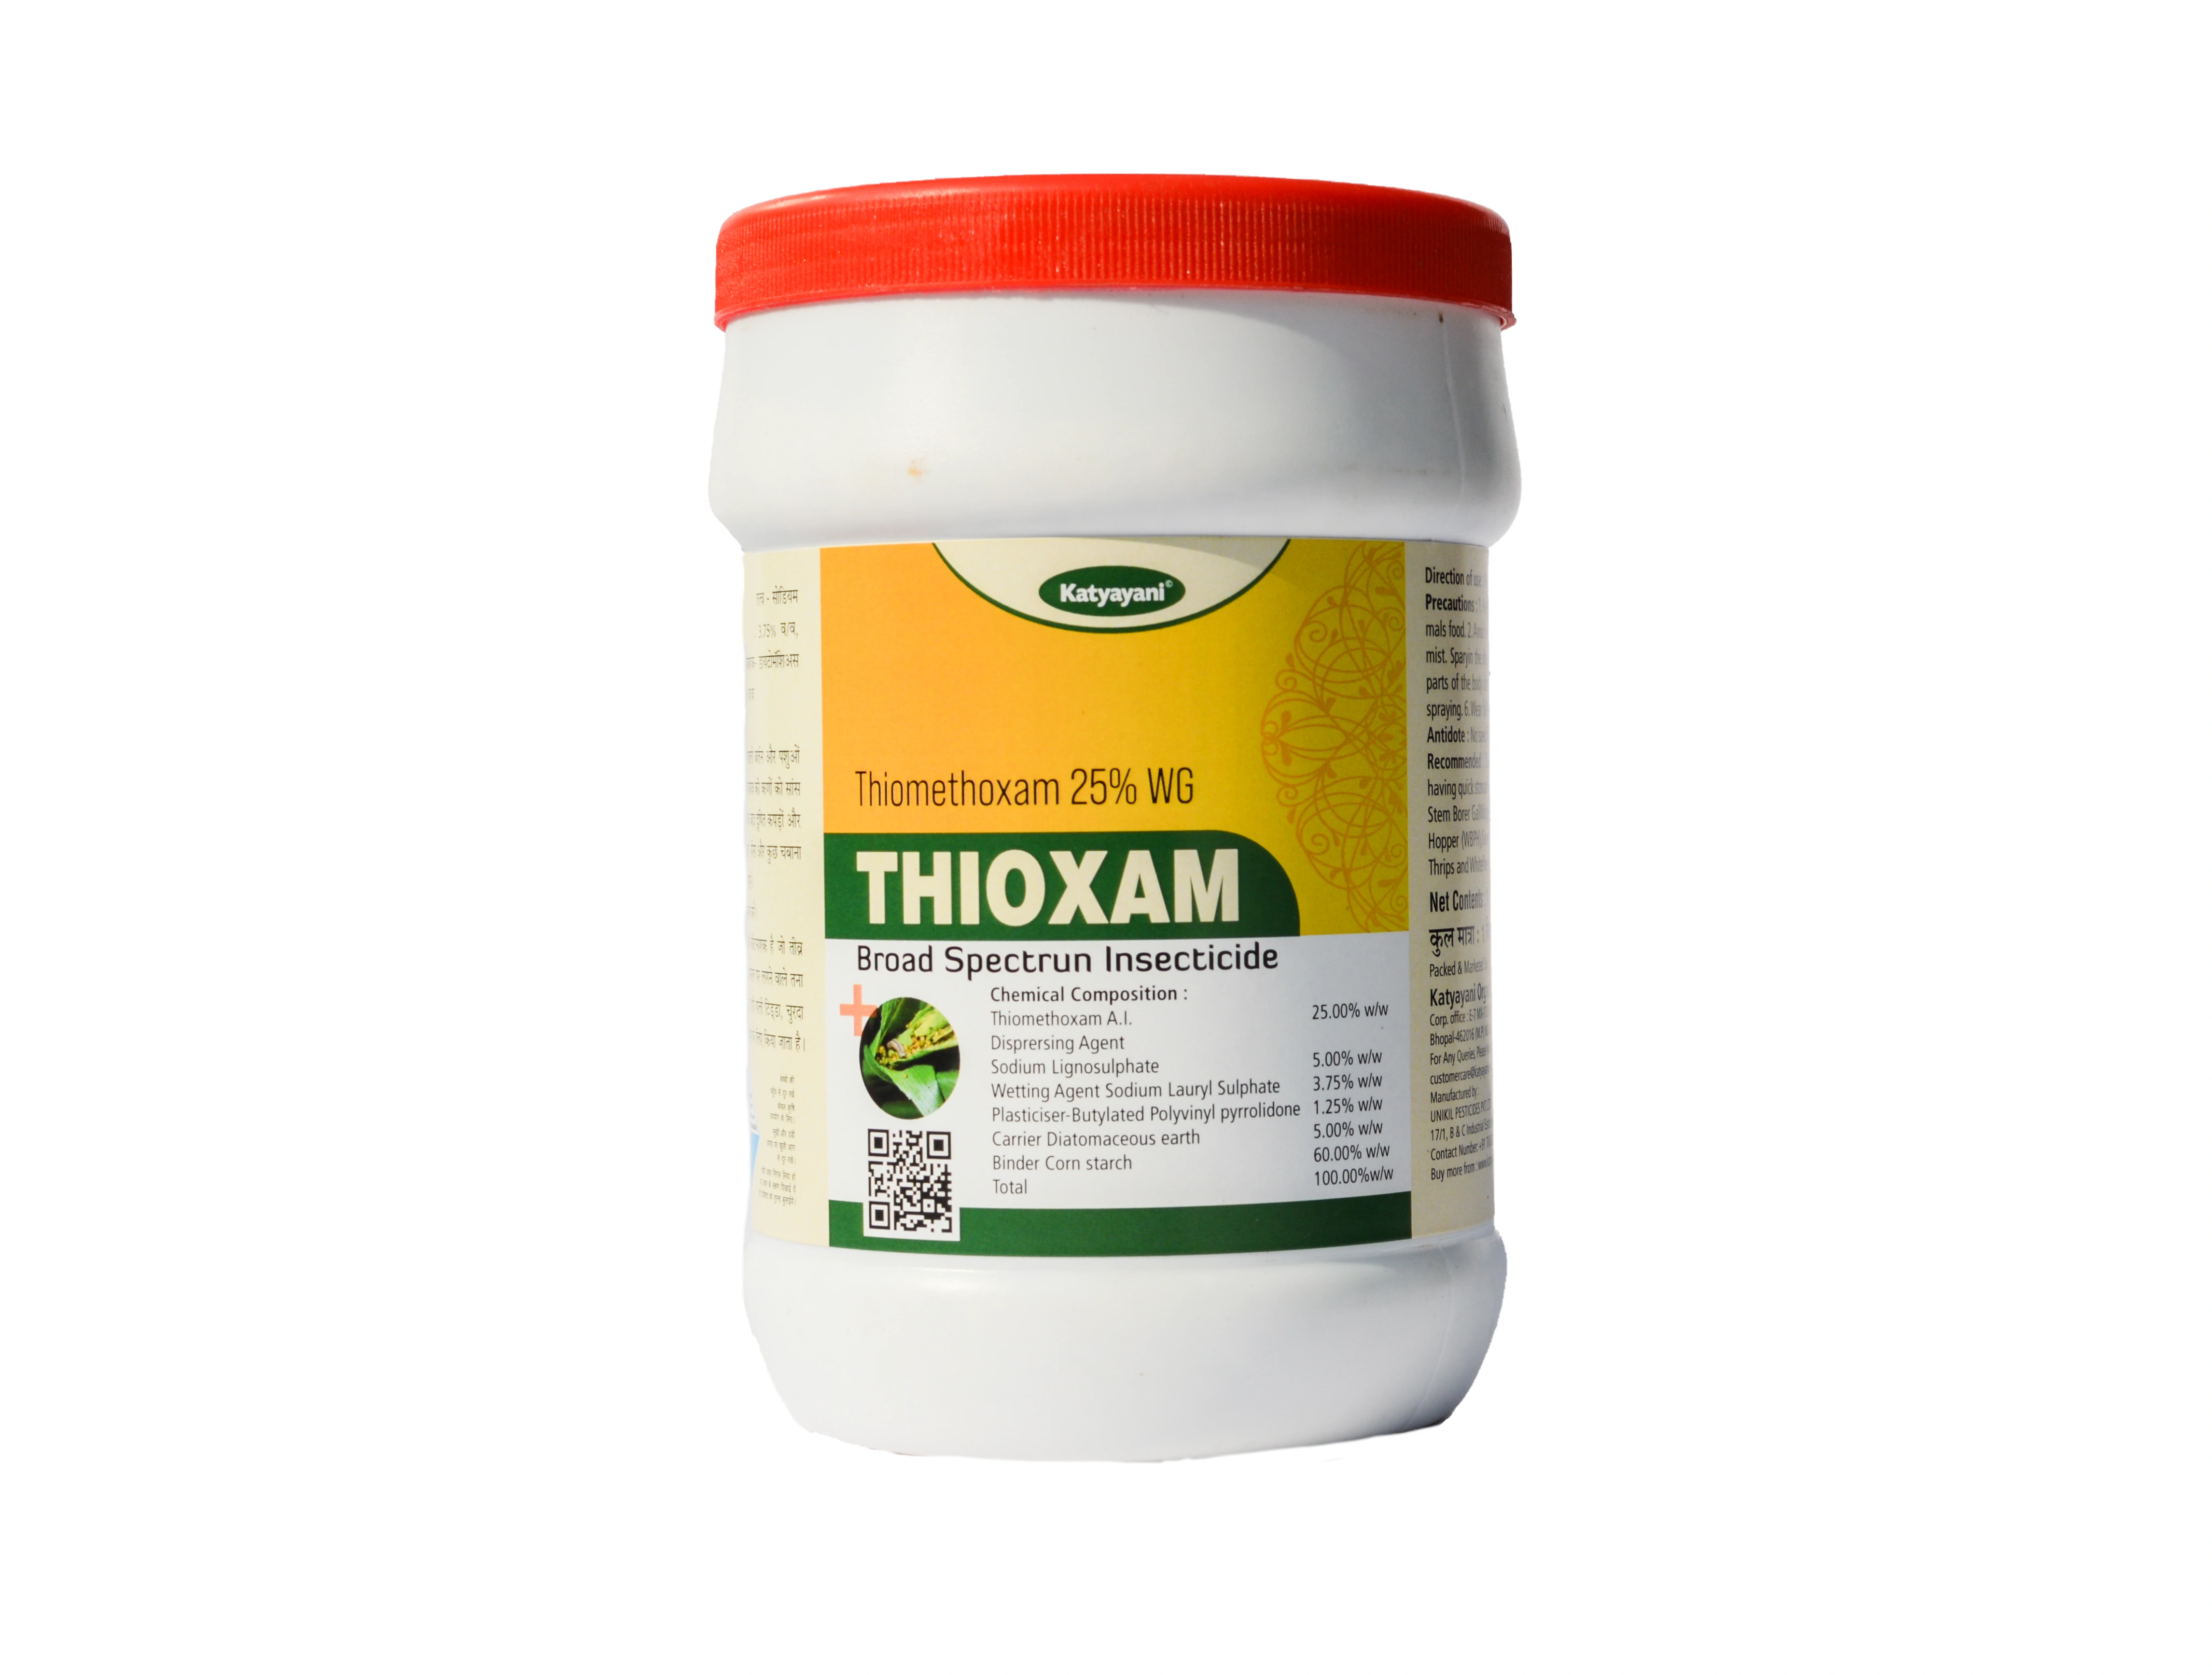 Katyayani Thioxam Thiamethoxam 25% WG Insecticide for Plants and Home Garden Broad Spectrum pest control for Sucking Pests , Stem Borer Gall Midge Leaf Folder Brown Paddy Hopper  Whitefly Thrips In R-11379206